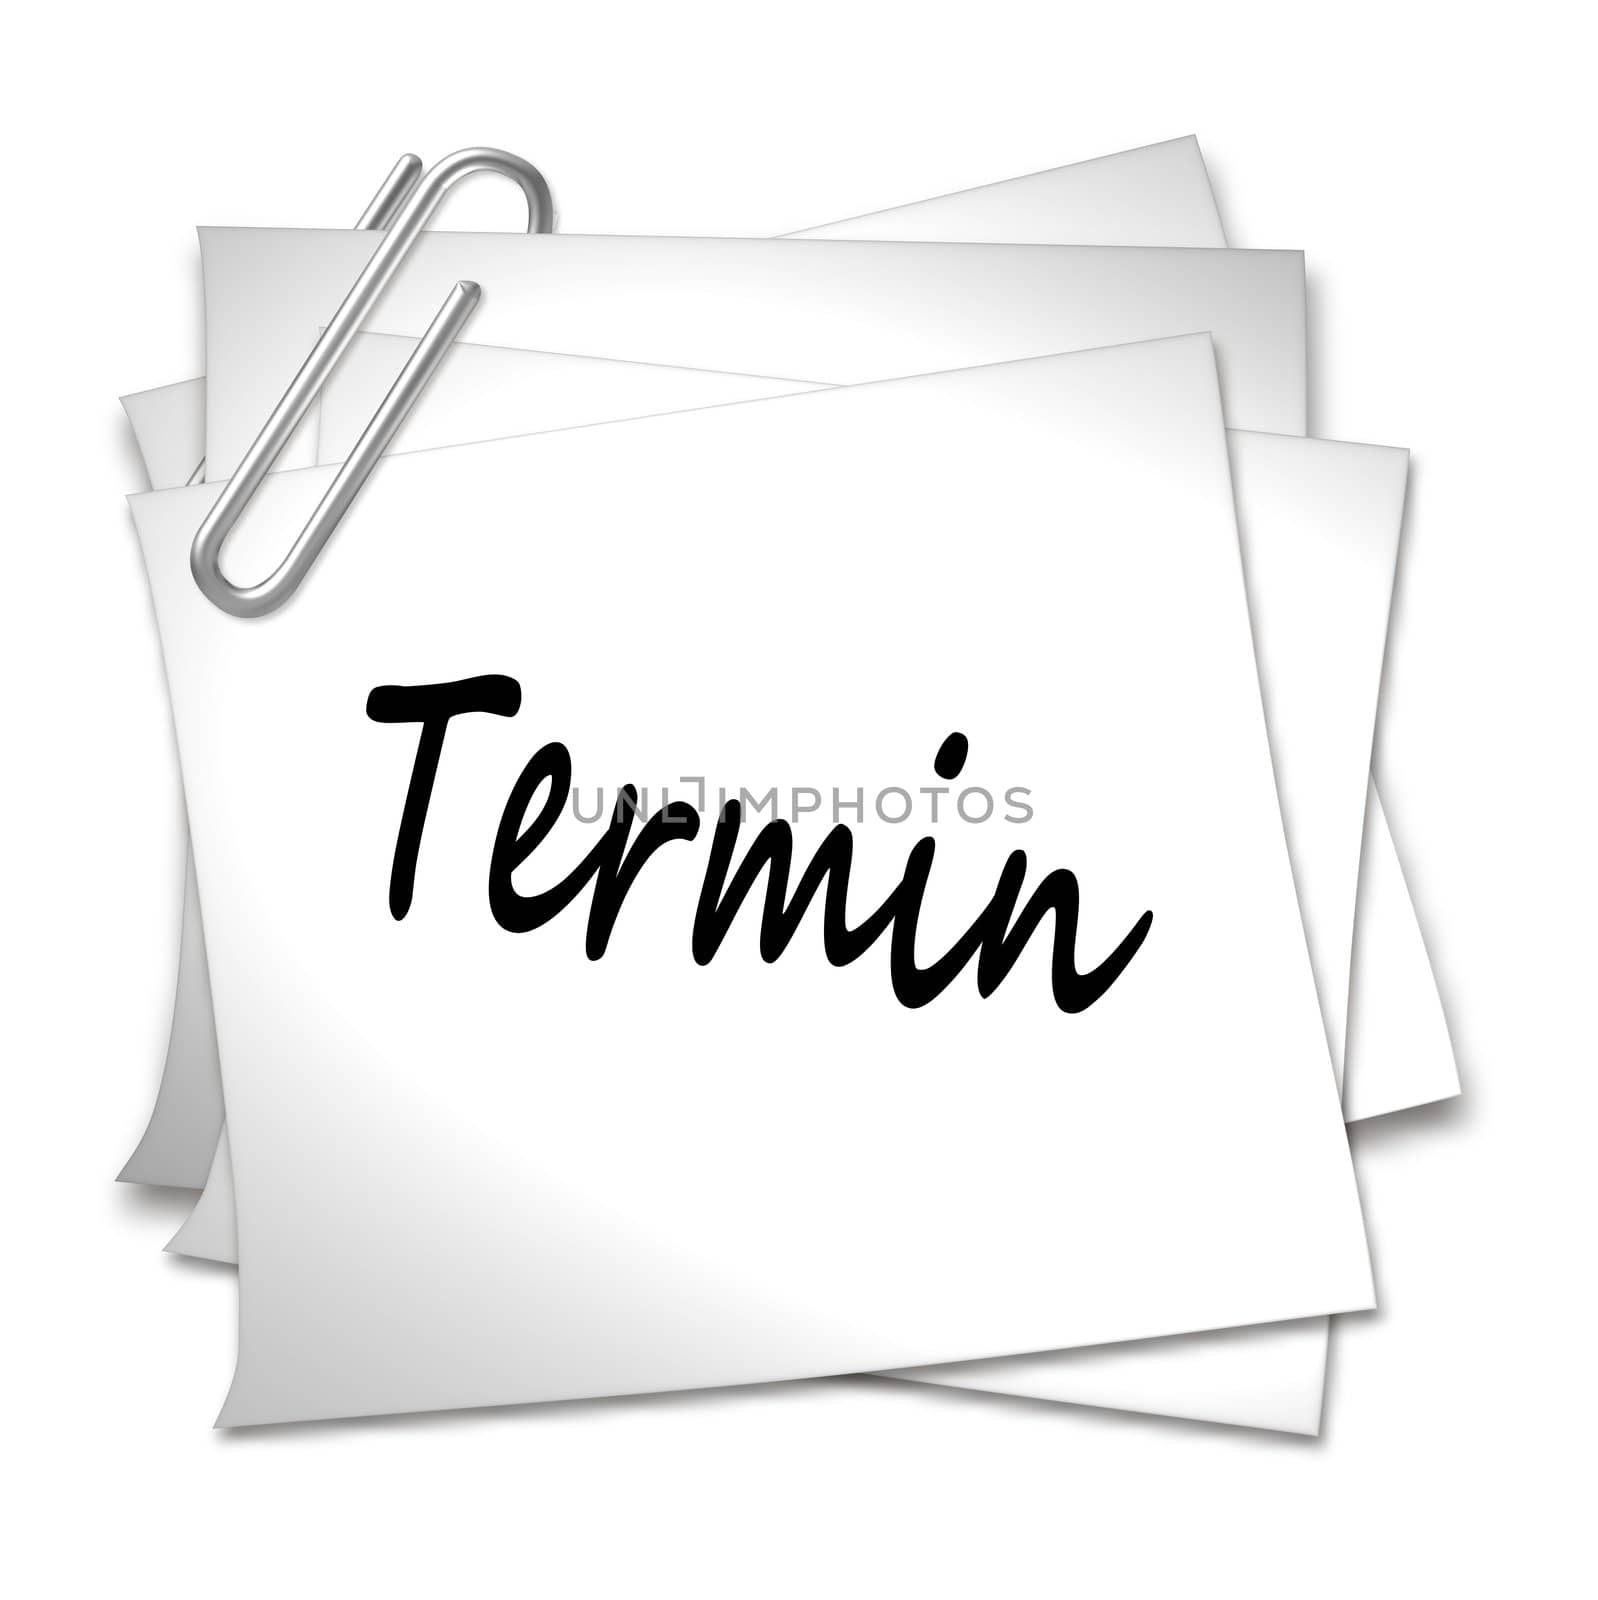 German Memo with Paper Clip - Termin by peromarketing